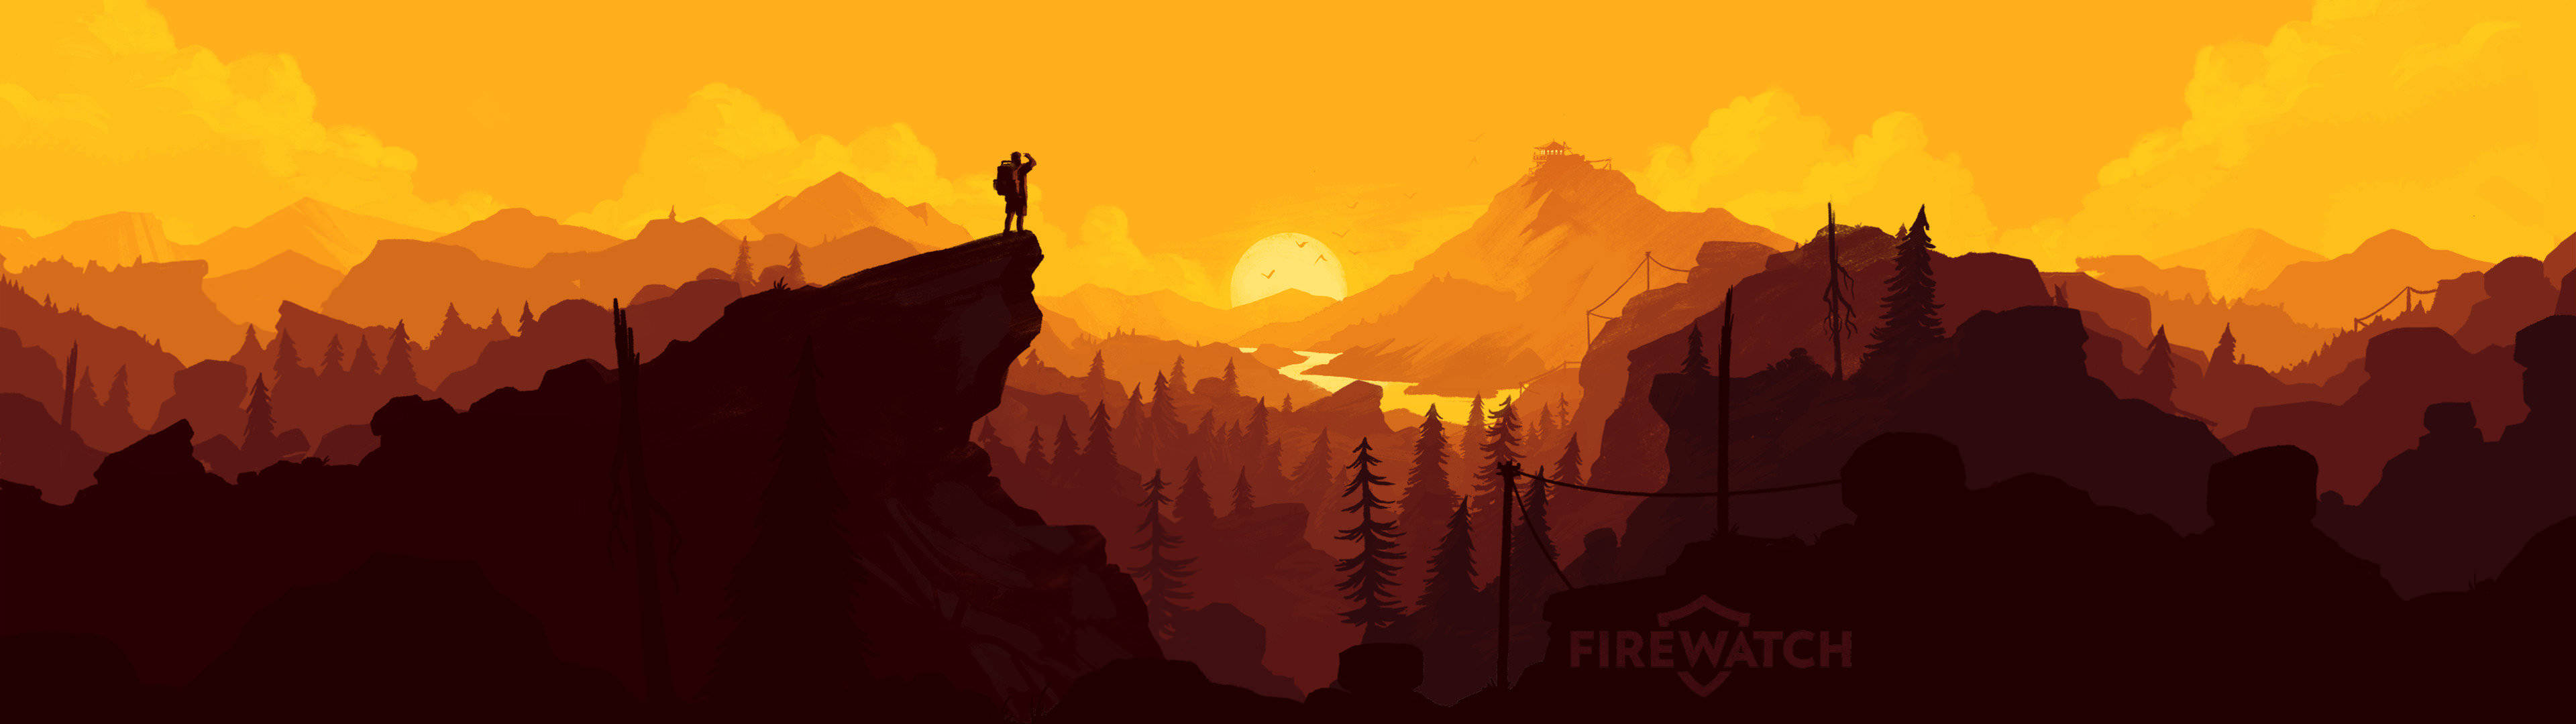 Get Lost In The Adventure Of Dual Screen With Firewatch.